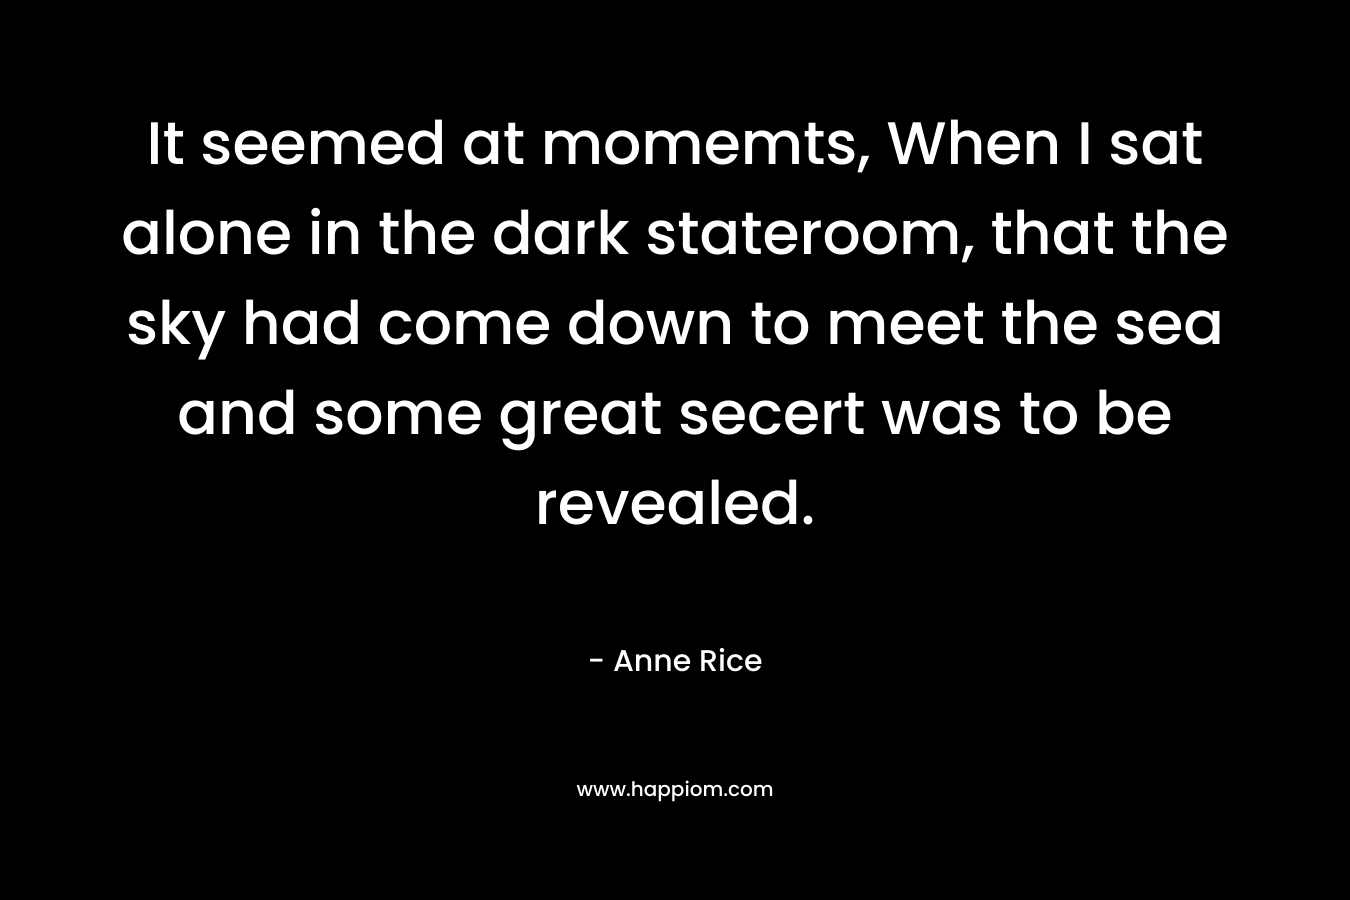 It seemed at momemts, When I sat alone in the dark stateroom, that the sky had come down to meet the sea and some great secert was to be revealed. – Anne Rice